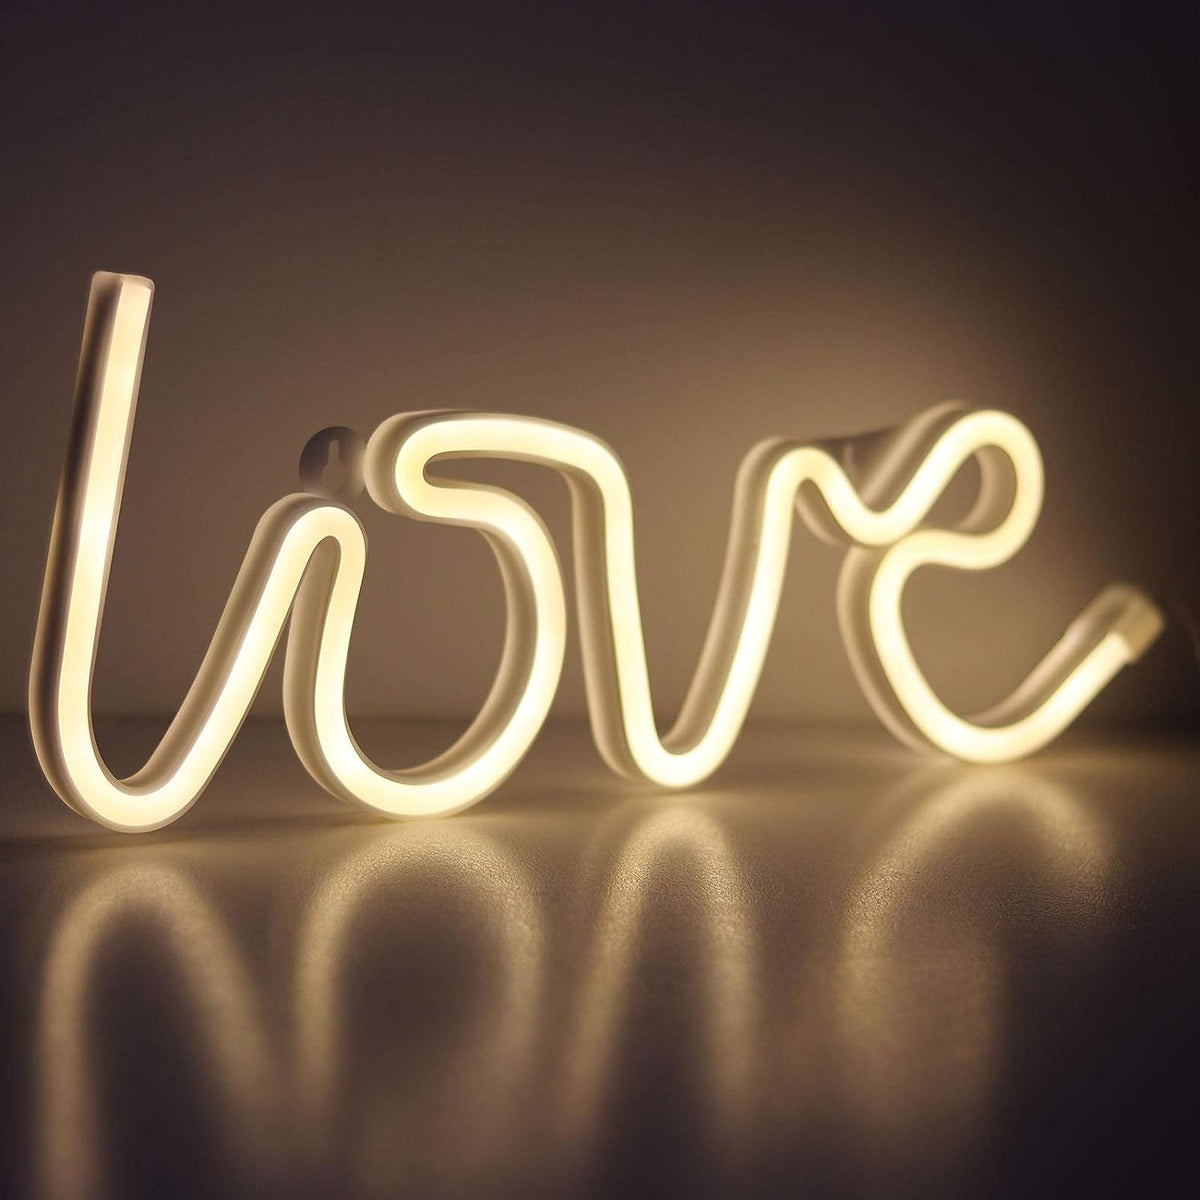 LOVE LED Neon Light Sign for Party Supplies, Room Decoration Accessory, Table Decoration